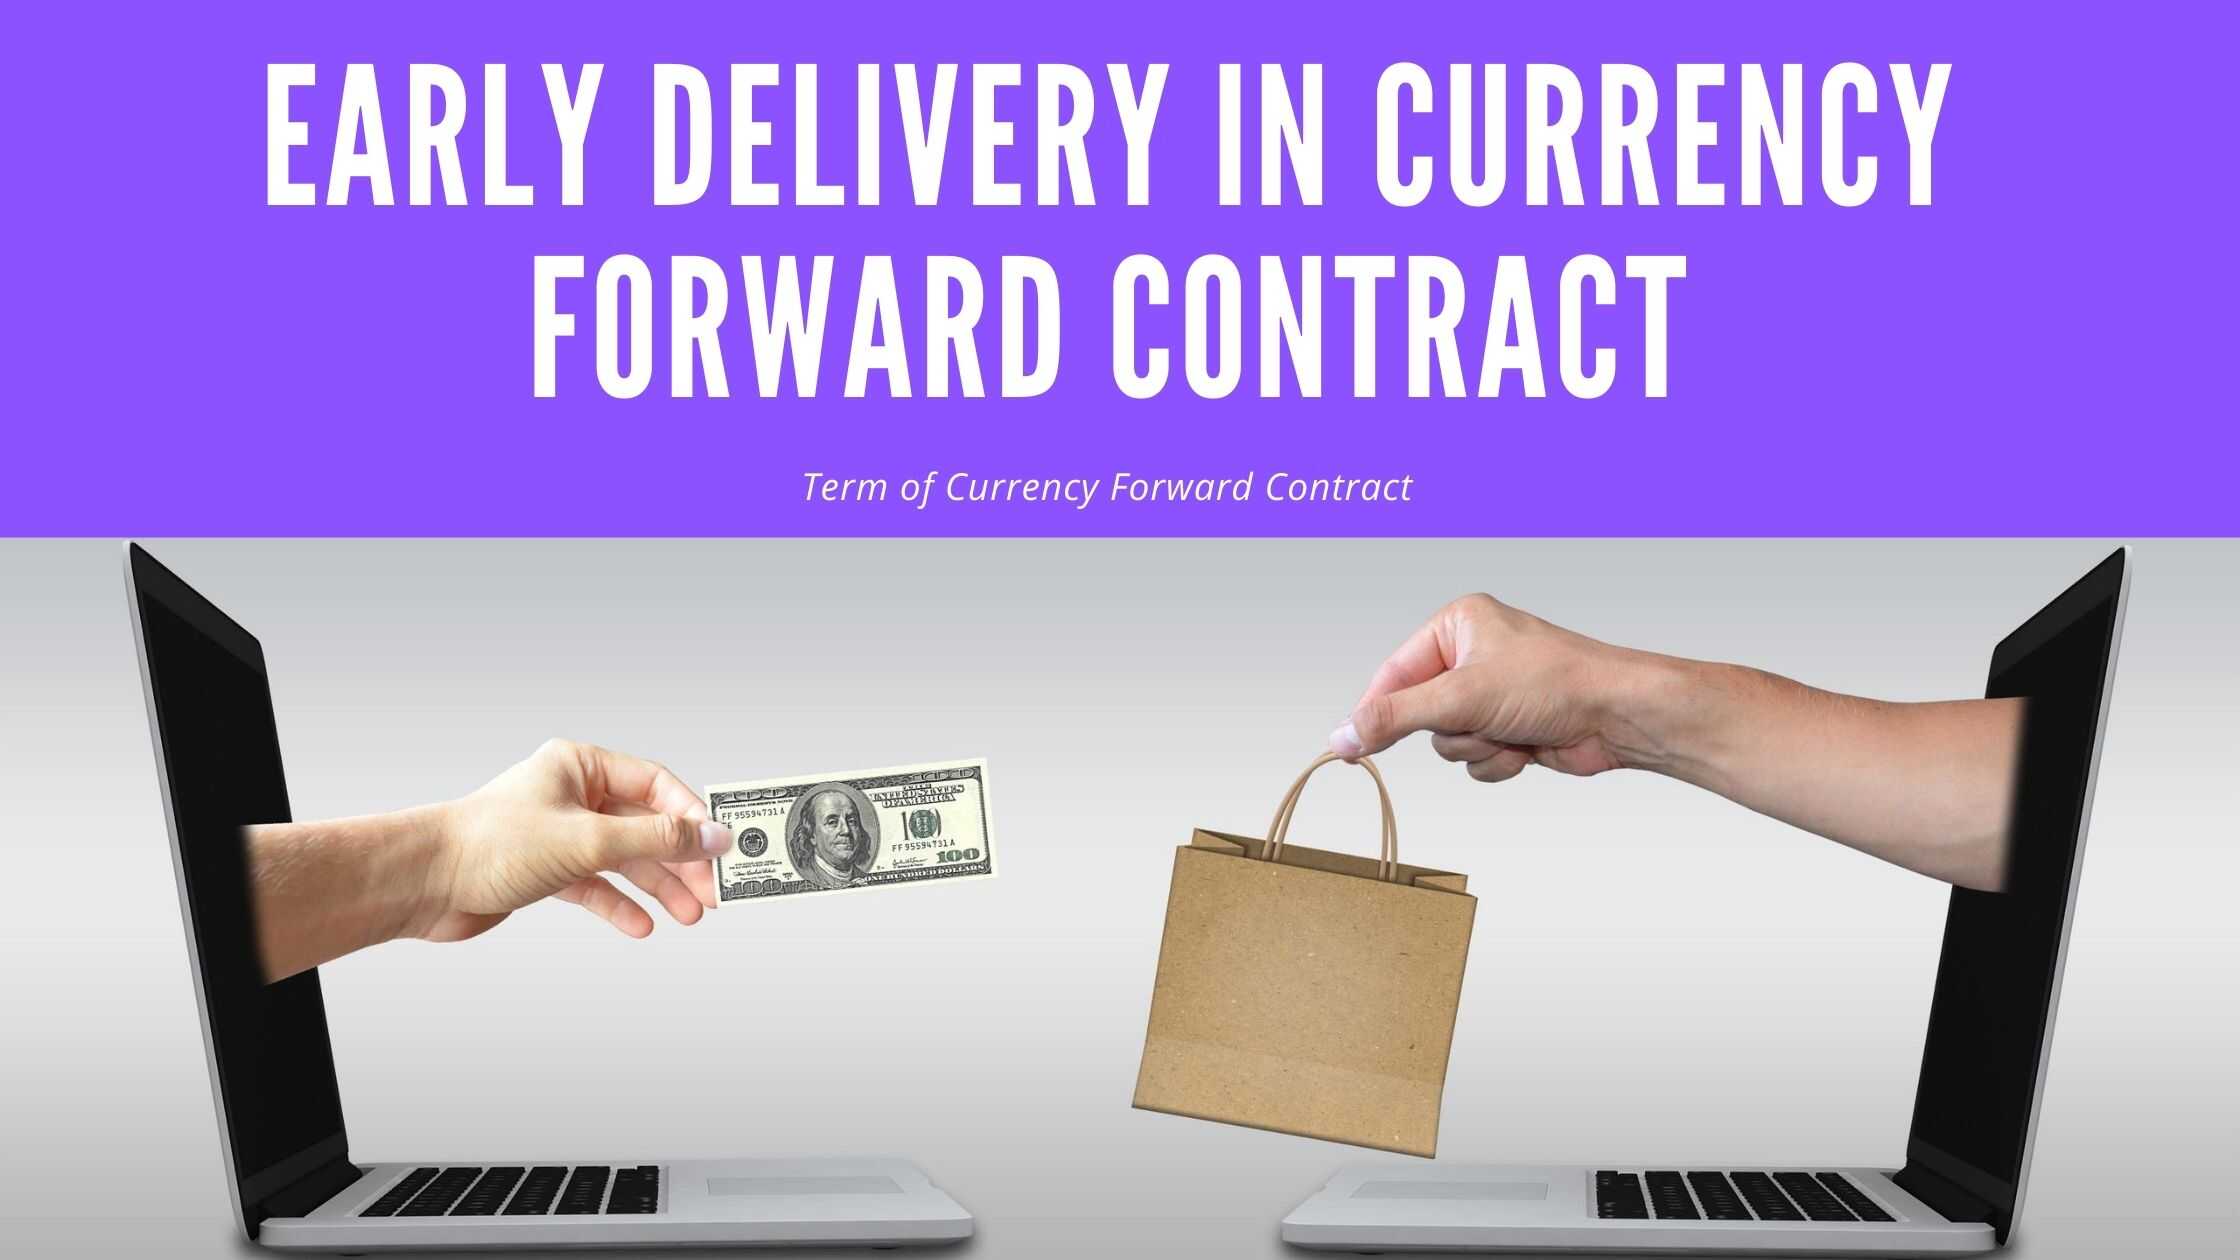 EARLY DELIVERY IN CURRENCY FORWARD CONTRACT